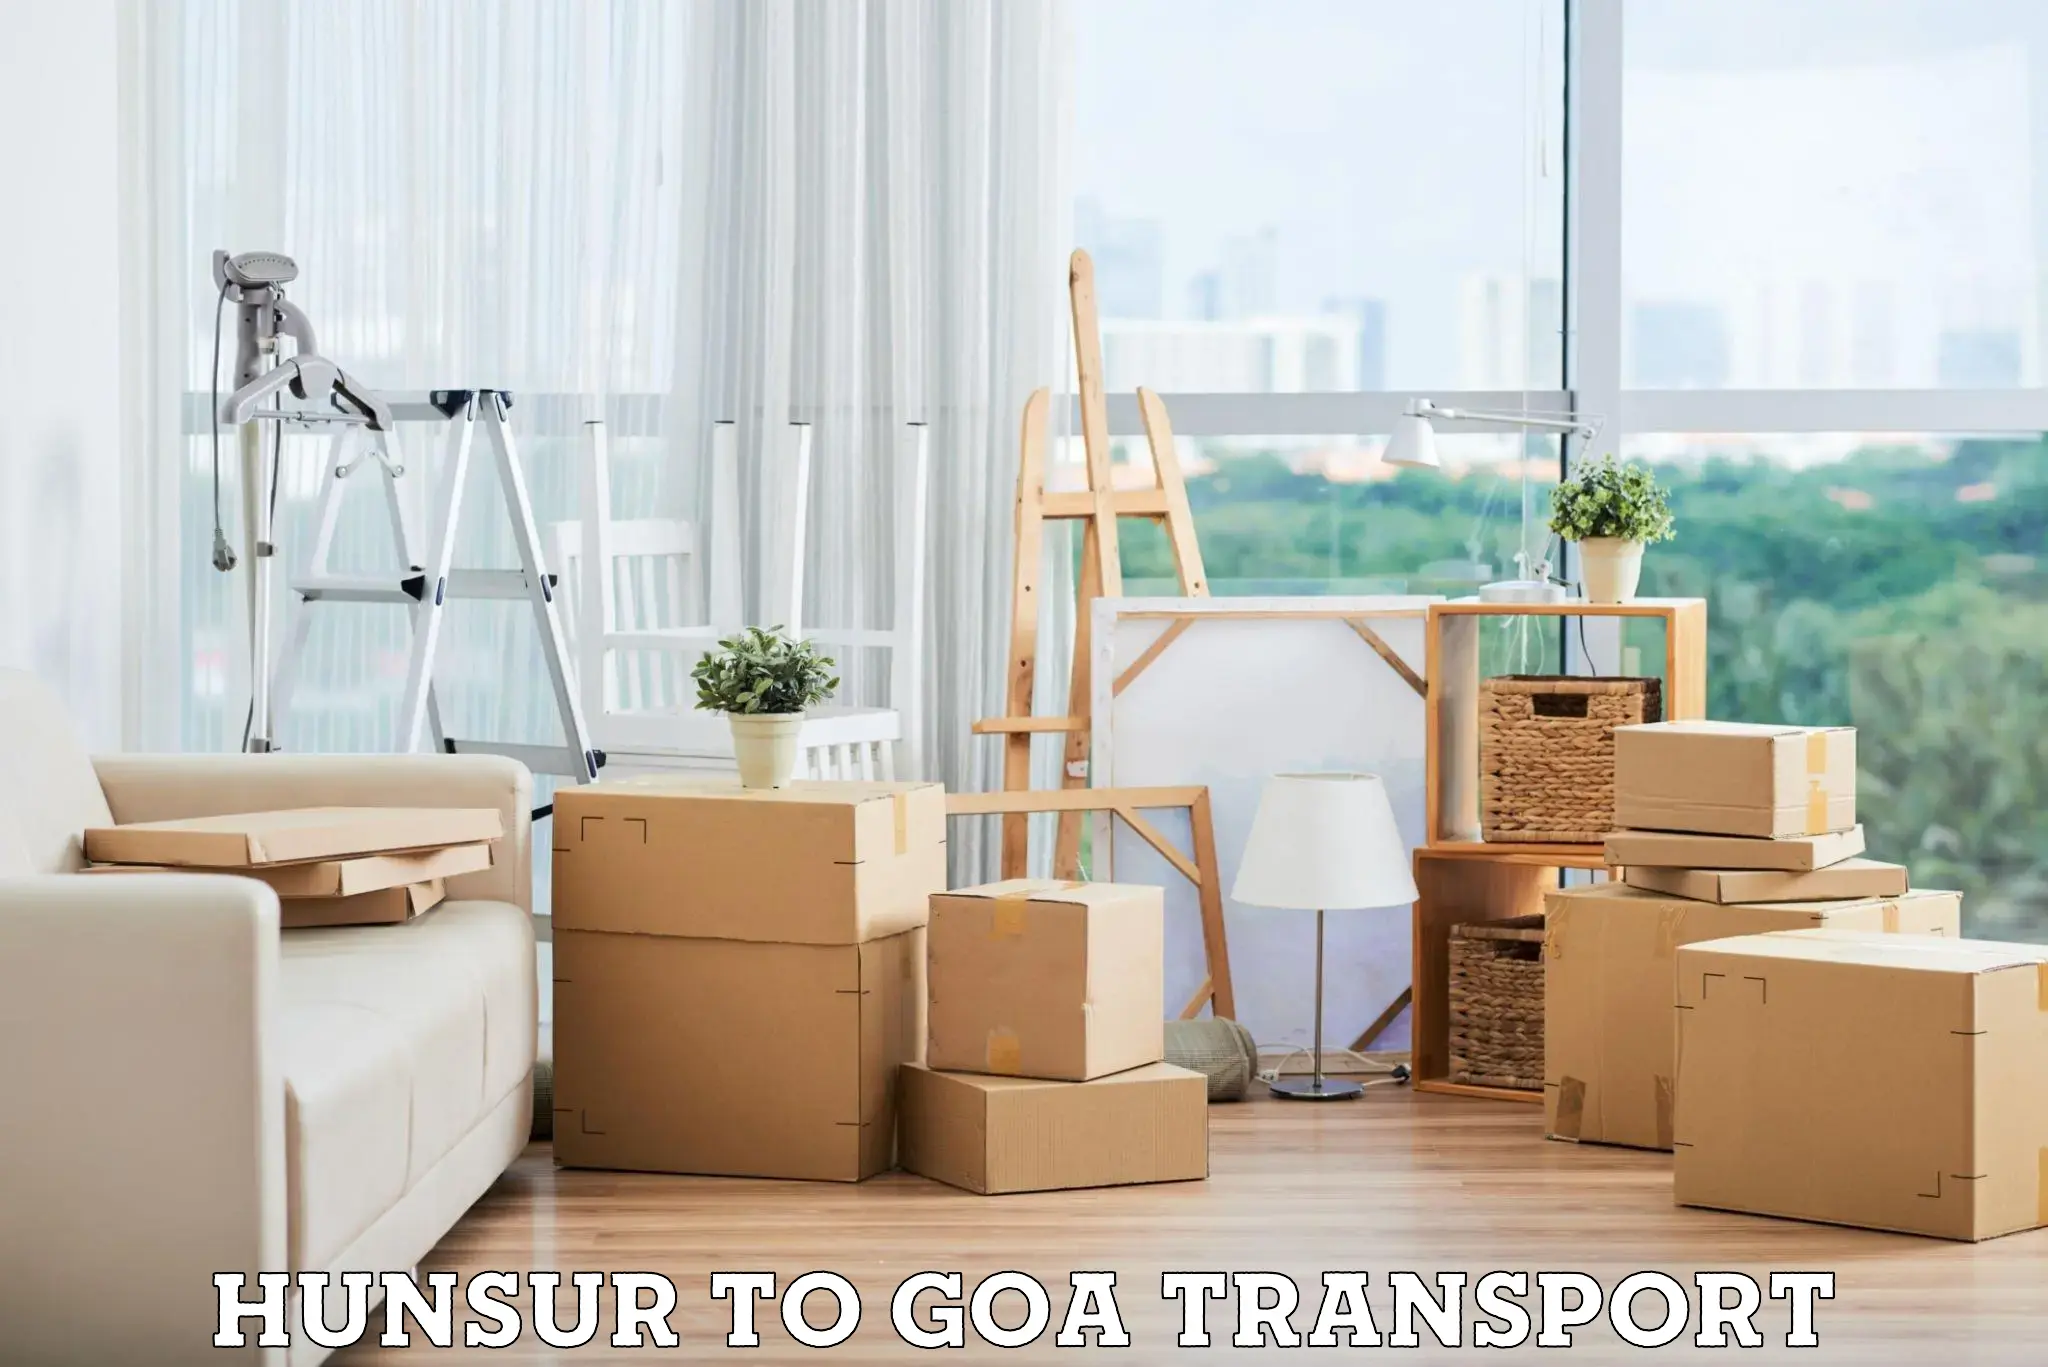 Container transport service Hunsur to Goa